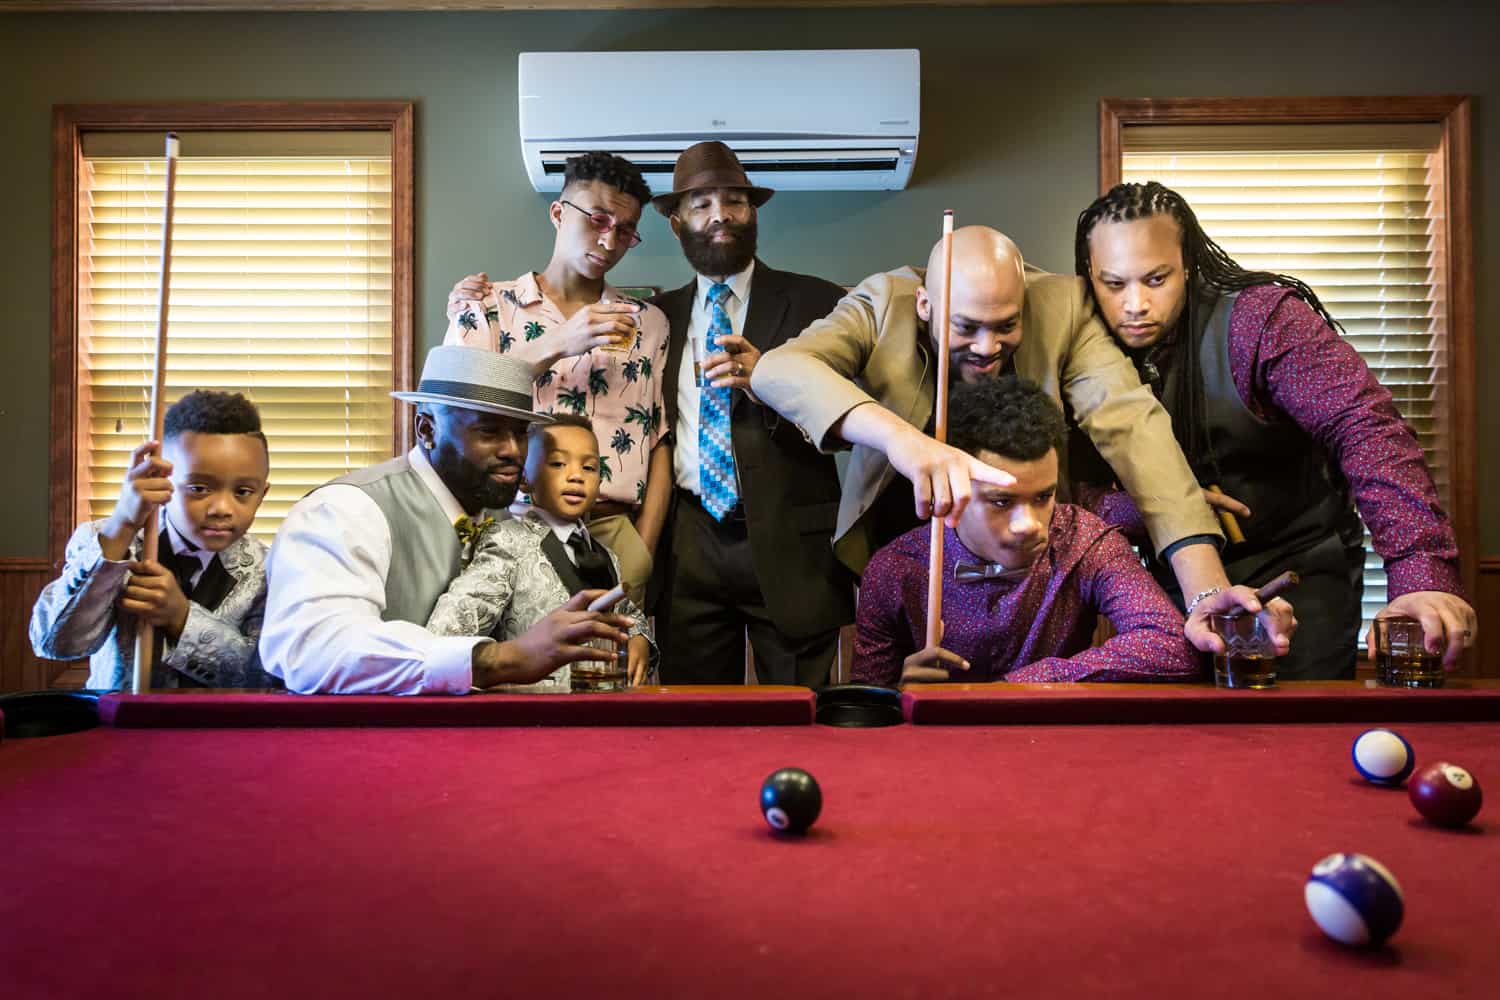 Male family members helping little boys play pool during a family reunion portrait